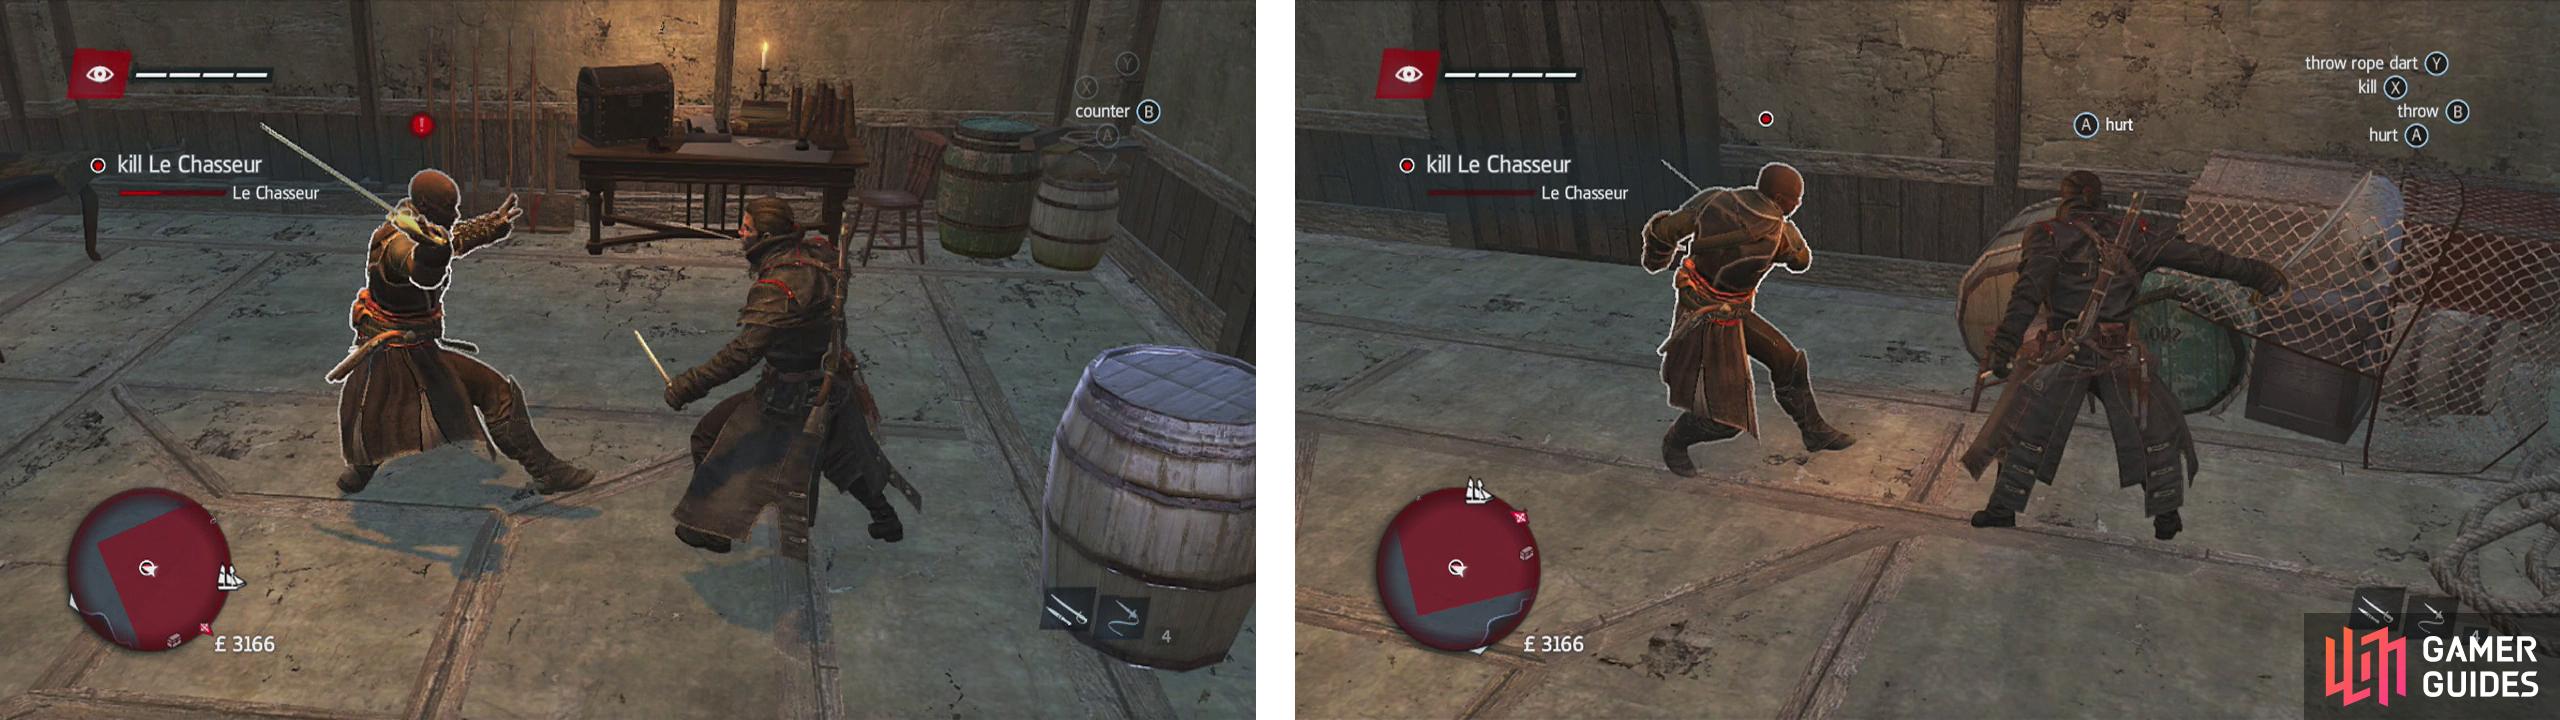 Counter the target in front of barrels in the room (left). When the 'Hurt' pop-up appears, hit the button prompt to damage him (right).